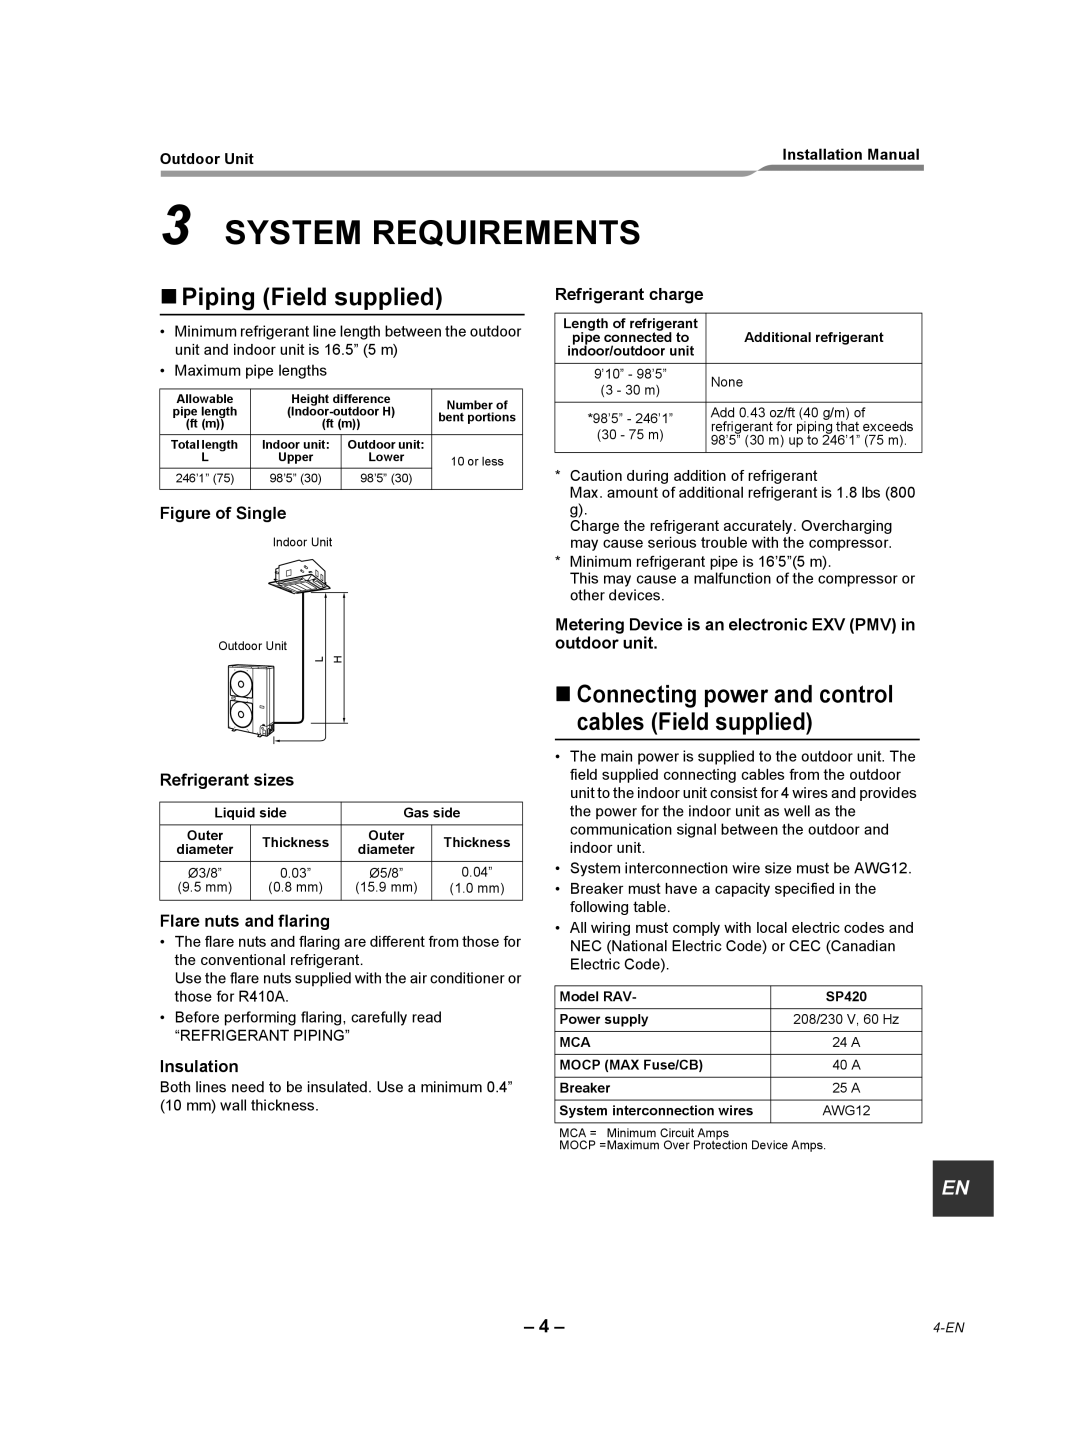 Toshiba RAV-SP420AT2-UL System Requirements, „Piping Field supplied, Figure of Single, Refrigerant sizes, Insulation 